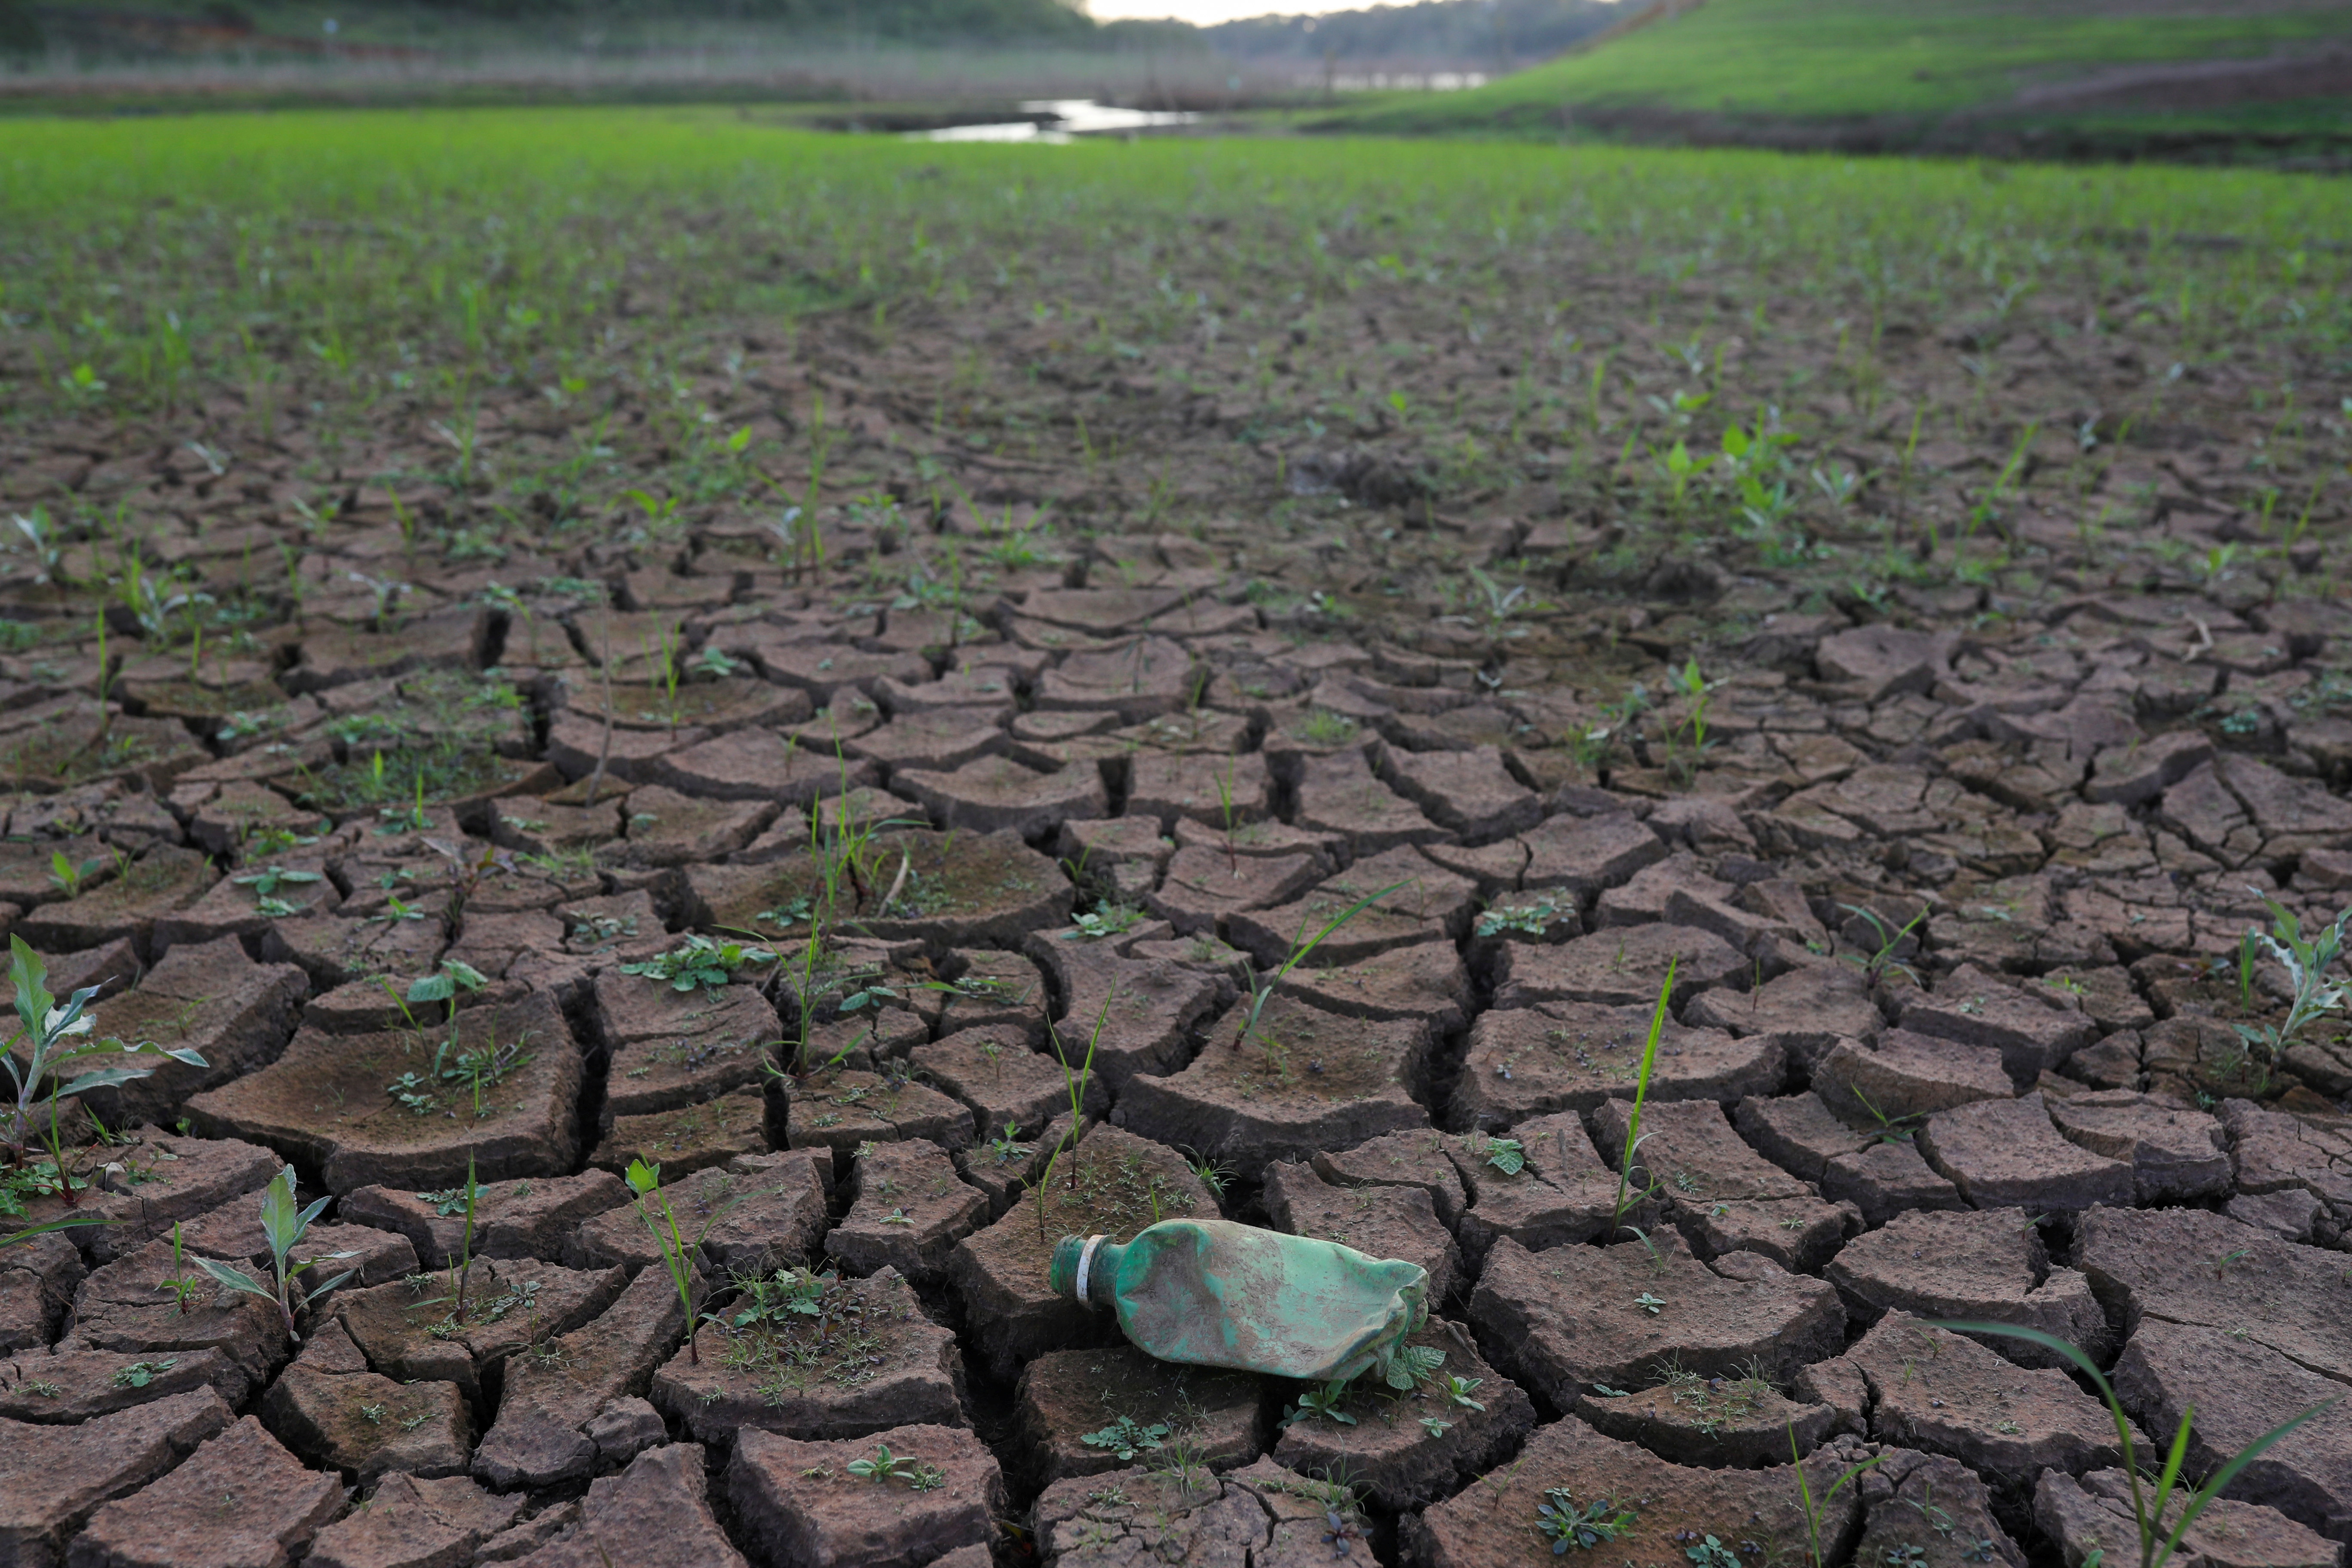 A crushed bottle is seen on the dry ground of the Jaguari dam, which is part of the Cantareira reservoir system, during a drought in Joanopolis, near Sao Paulo, Brazil, October 8, 2021. REUTERS/Amanda Perobelli/File Photo